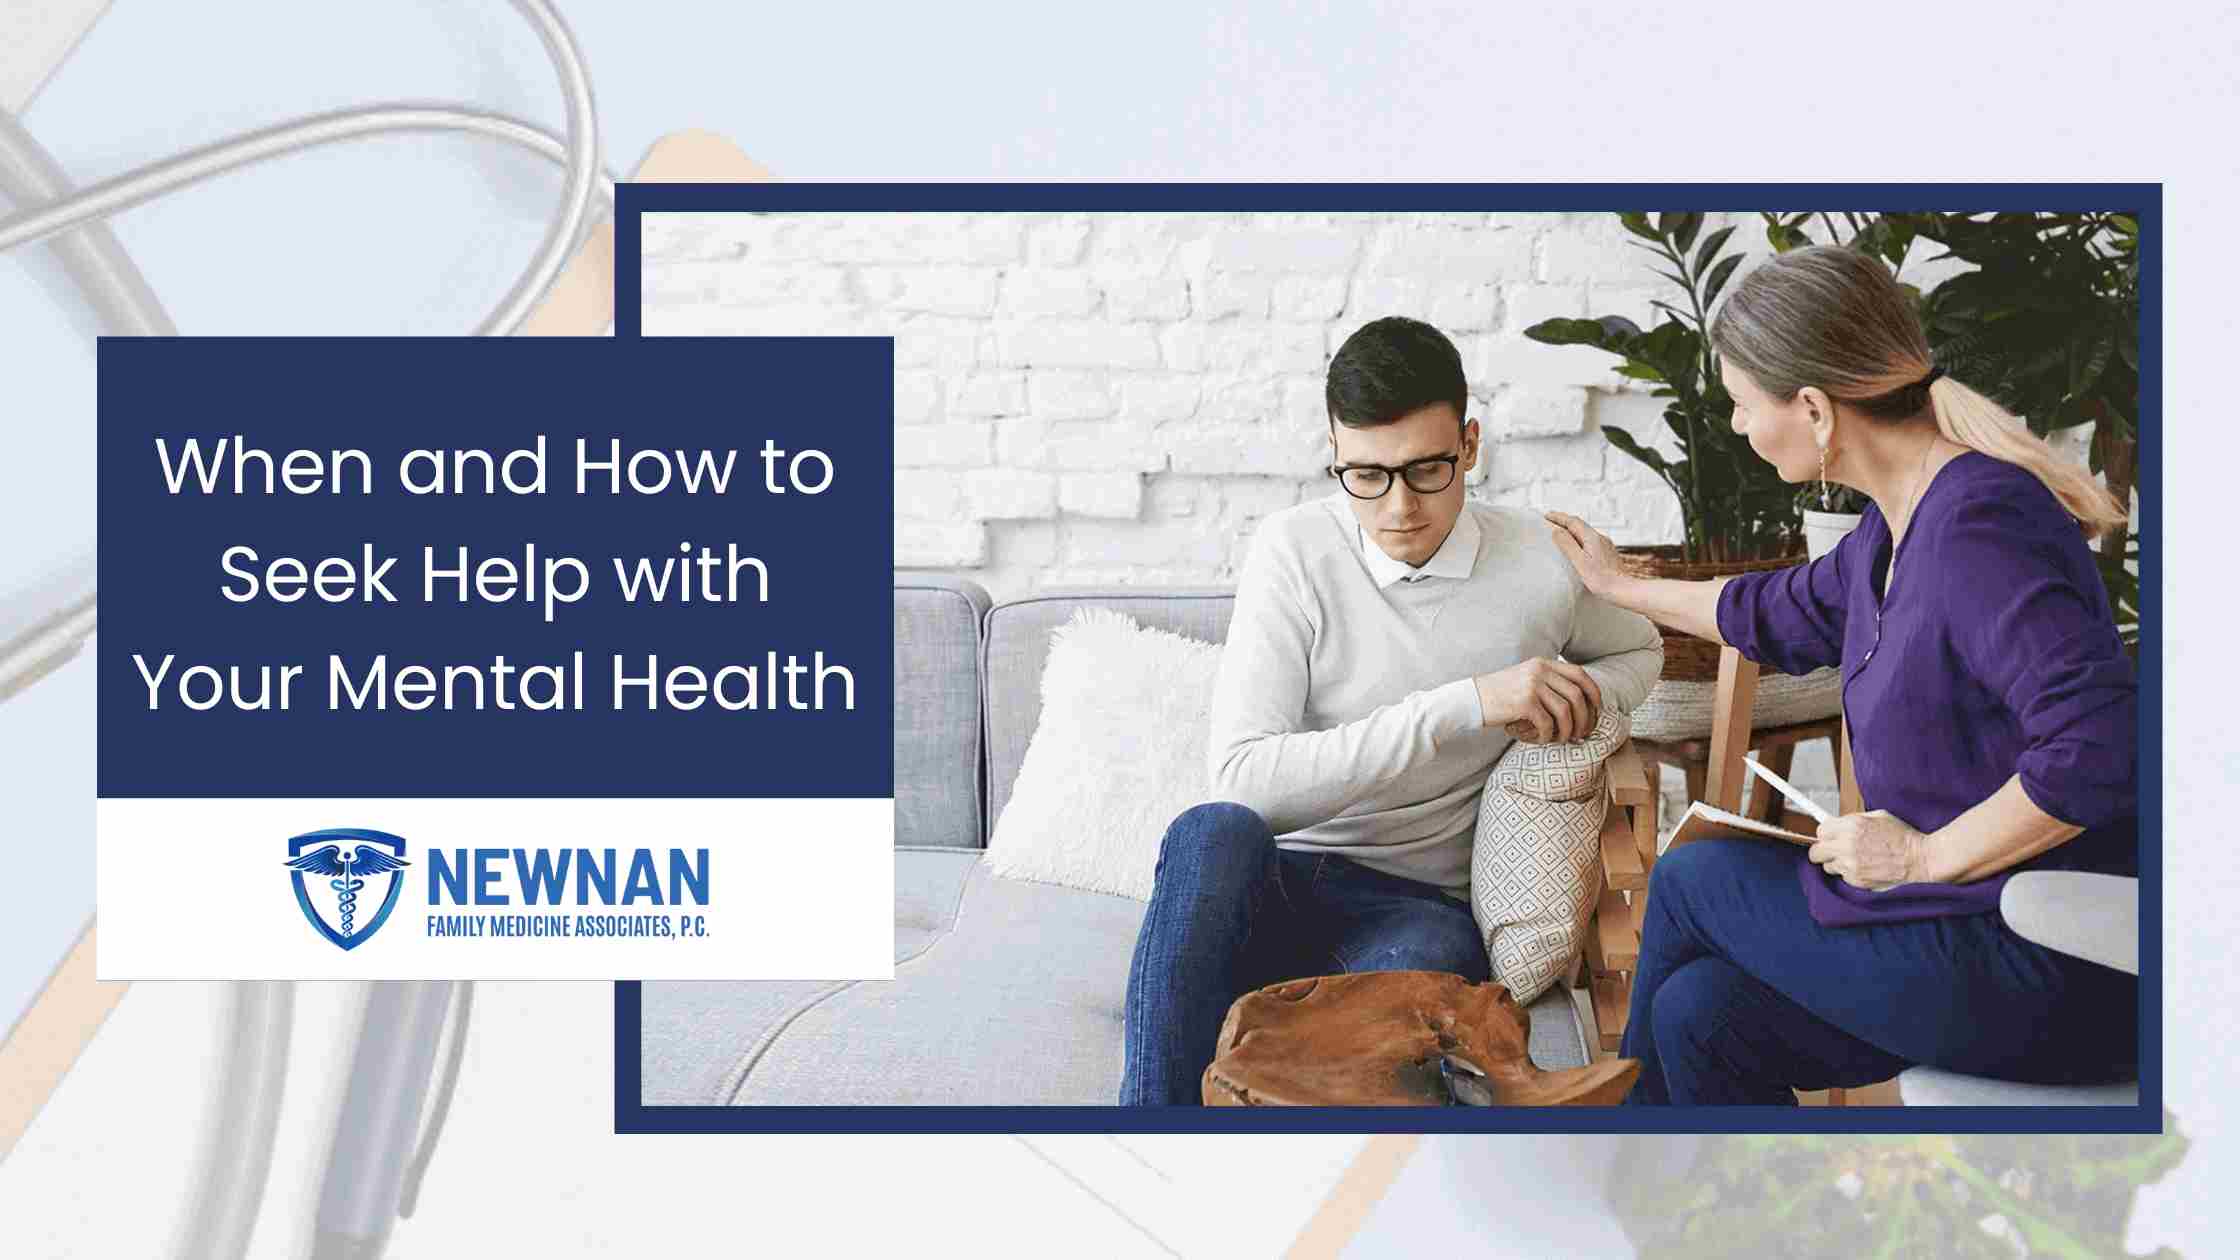 When and How to Seek Help with Your Mental Health